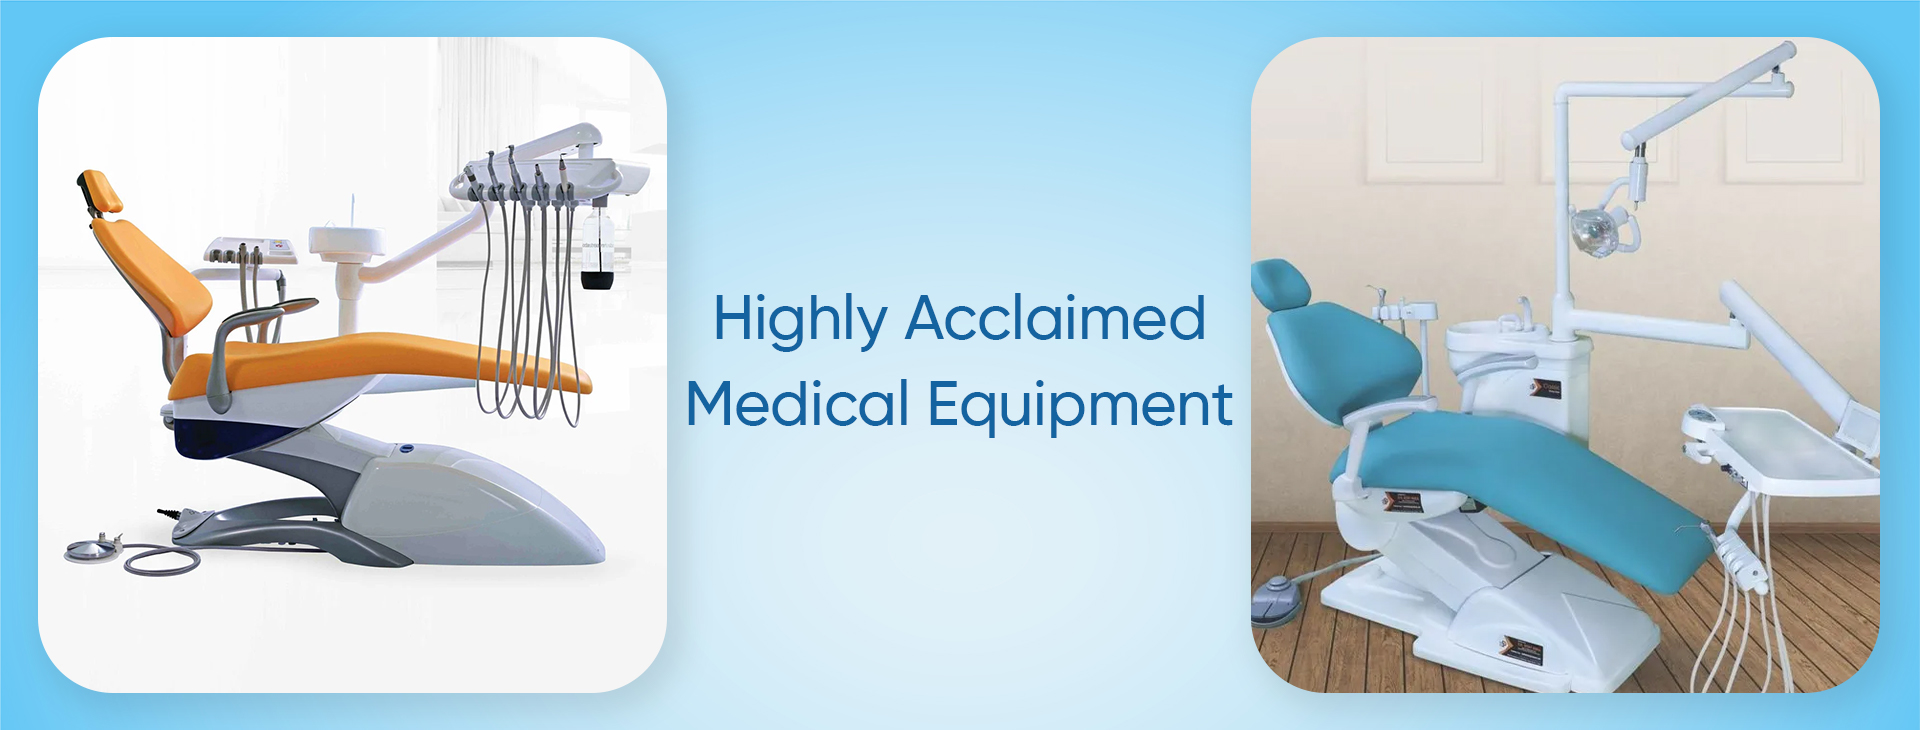 Purvanchal Dental and Surgical Supplies